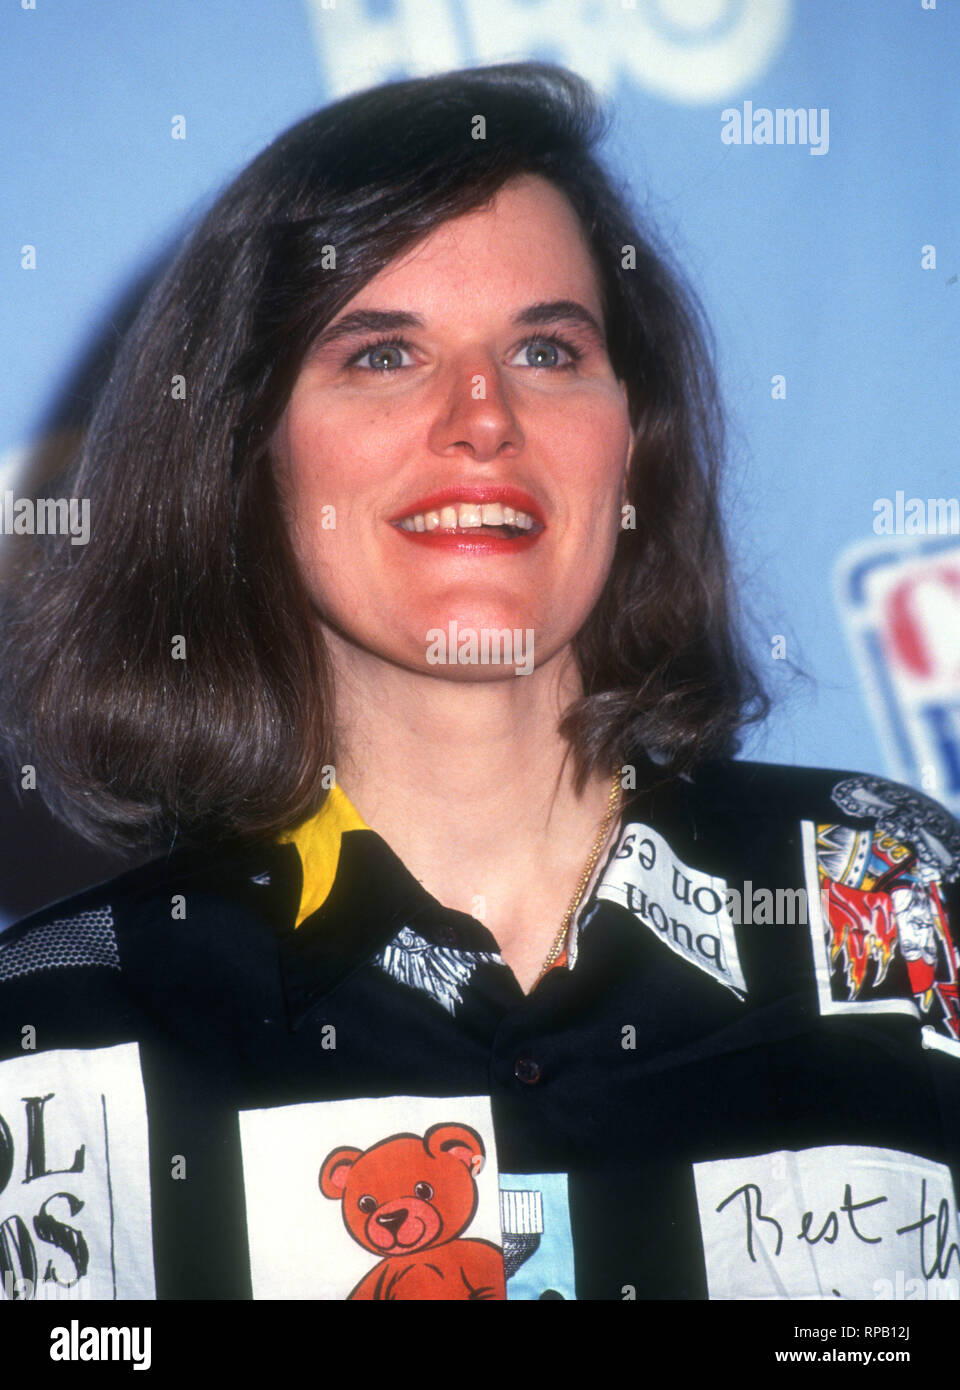 LOS ANGELES, CA - JANUARY 15: Comedian Paula Poundstone attends the 'Comic Relief VI' HBO's Comedy Television Special to Benefit America's Homeless on January 15, 1994 at Shrine Auditorium in Los Angeles, California. Photo by Barry King/Alamy Stock Photo Stock Photo